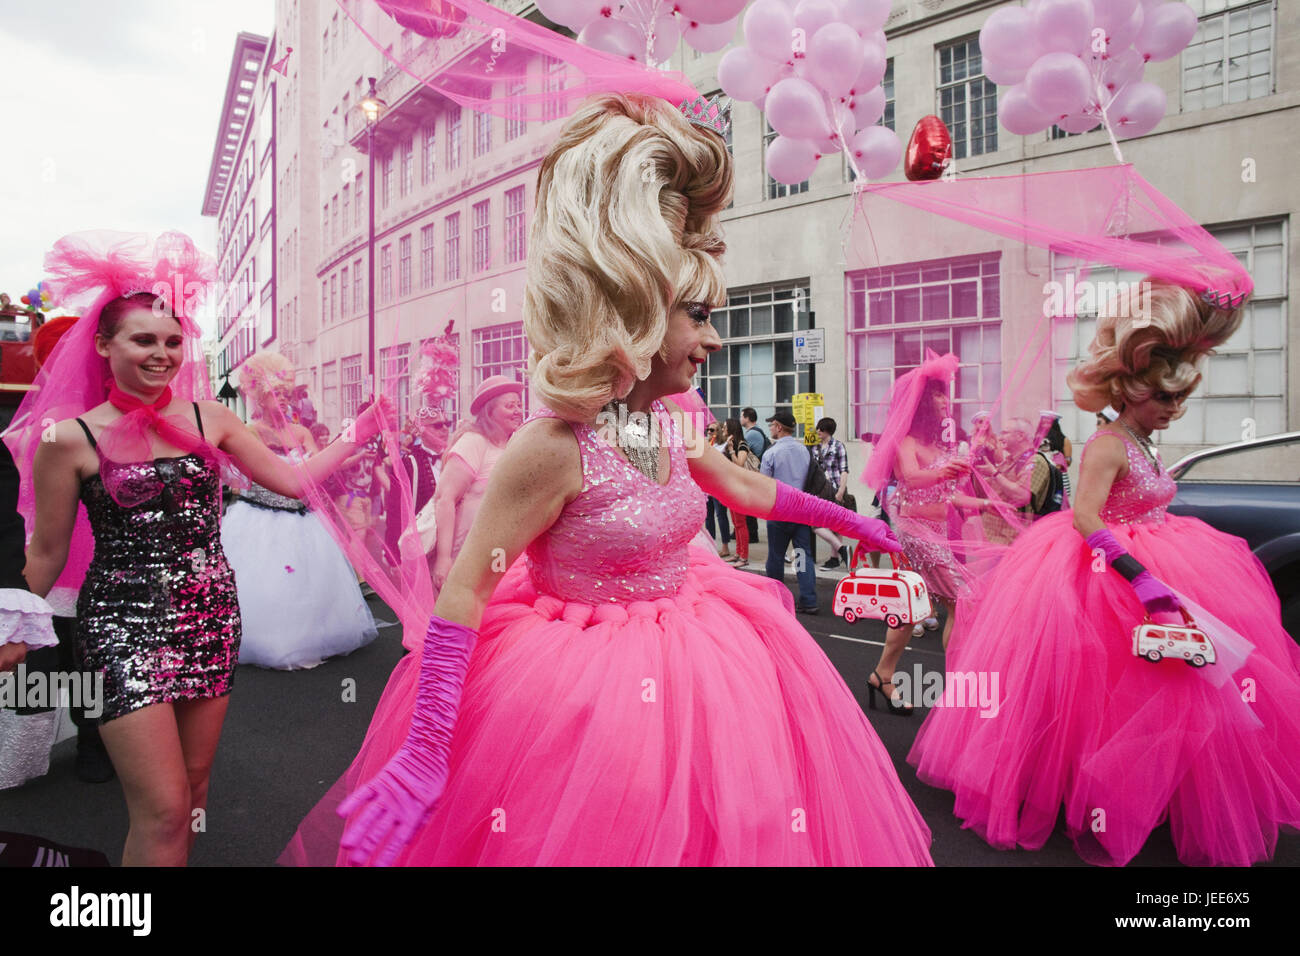 https://c8.alamy.com/comp/JEE6X5/england-london-gay-pride-parade-people-pink-clothes-town-festival-JEE6X5.jpg